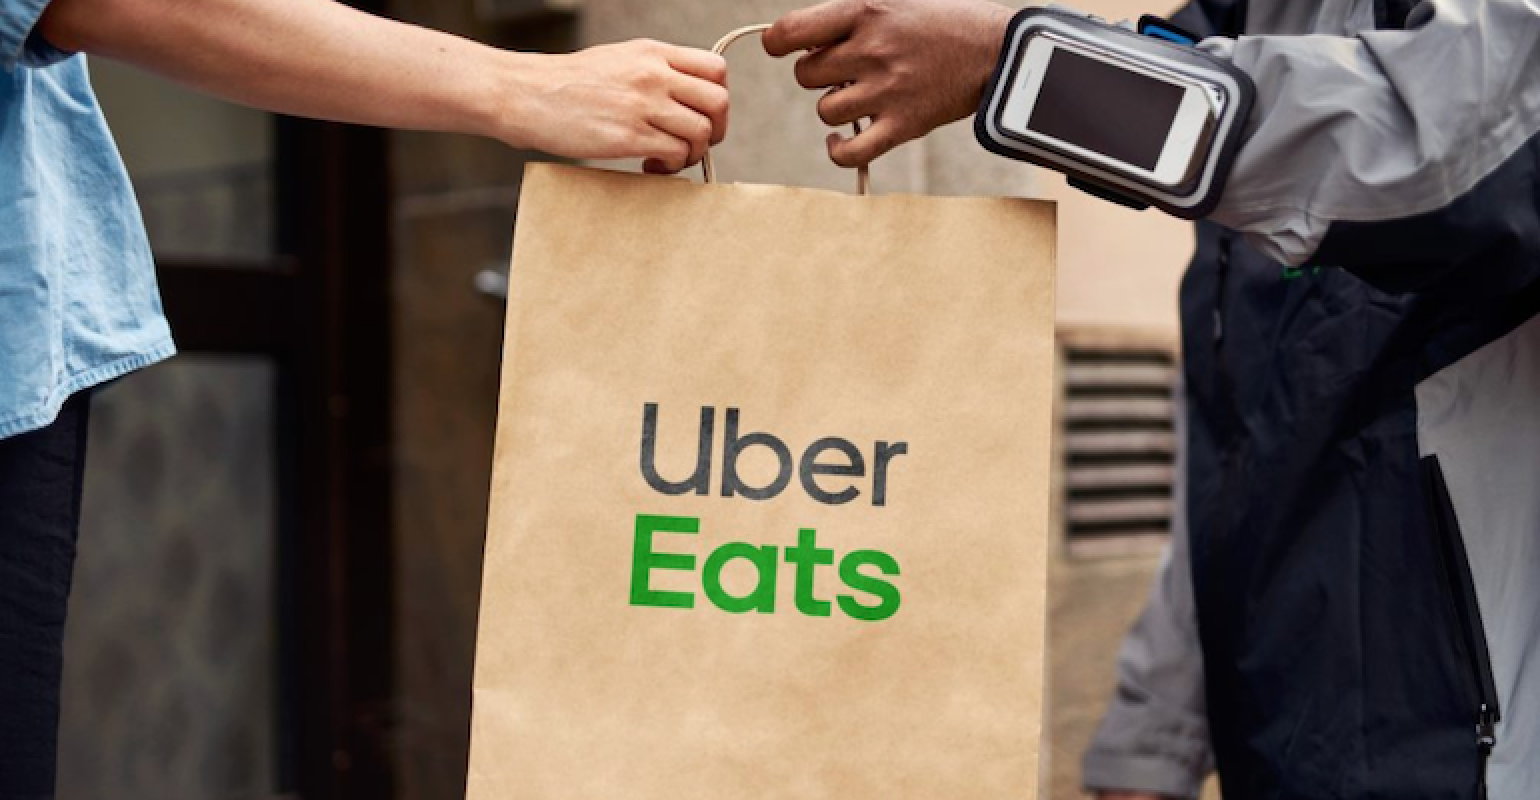 Uber eats delivery photo